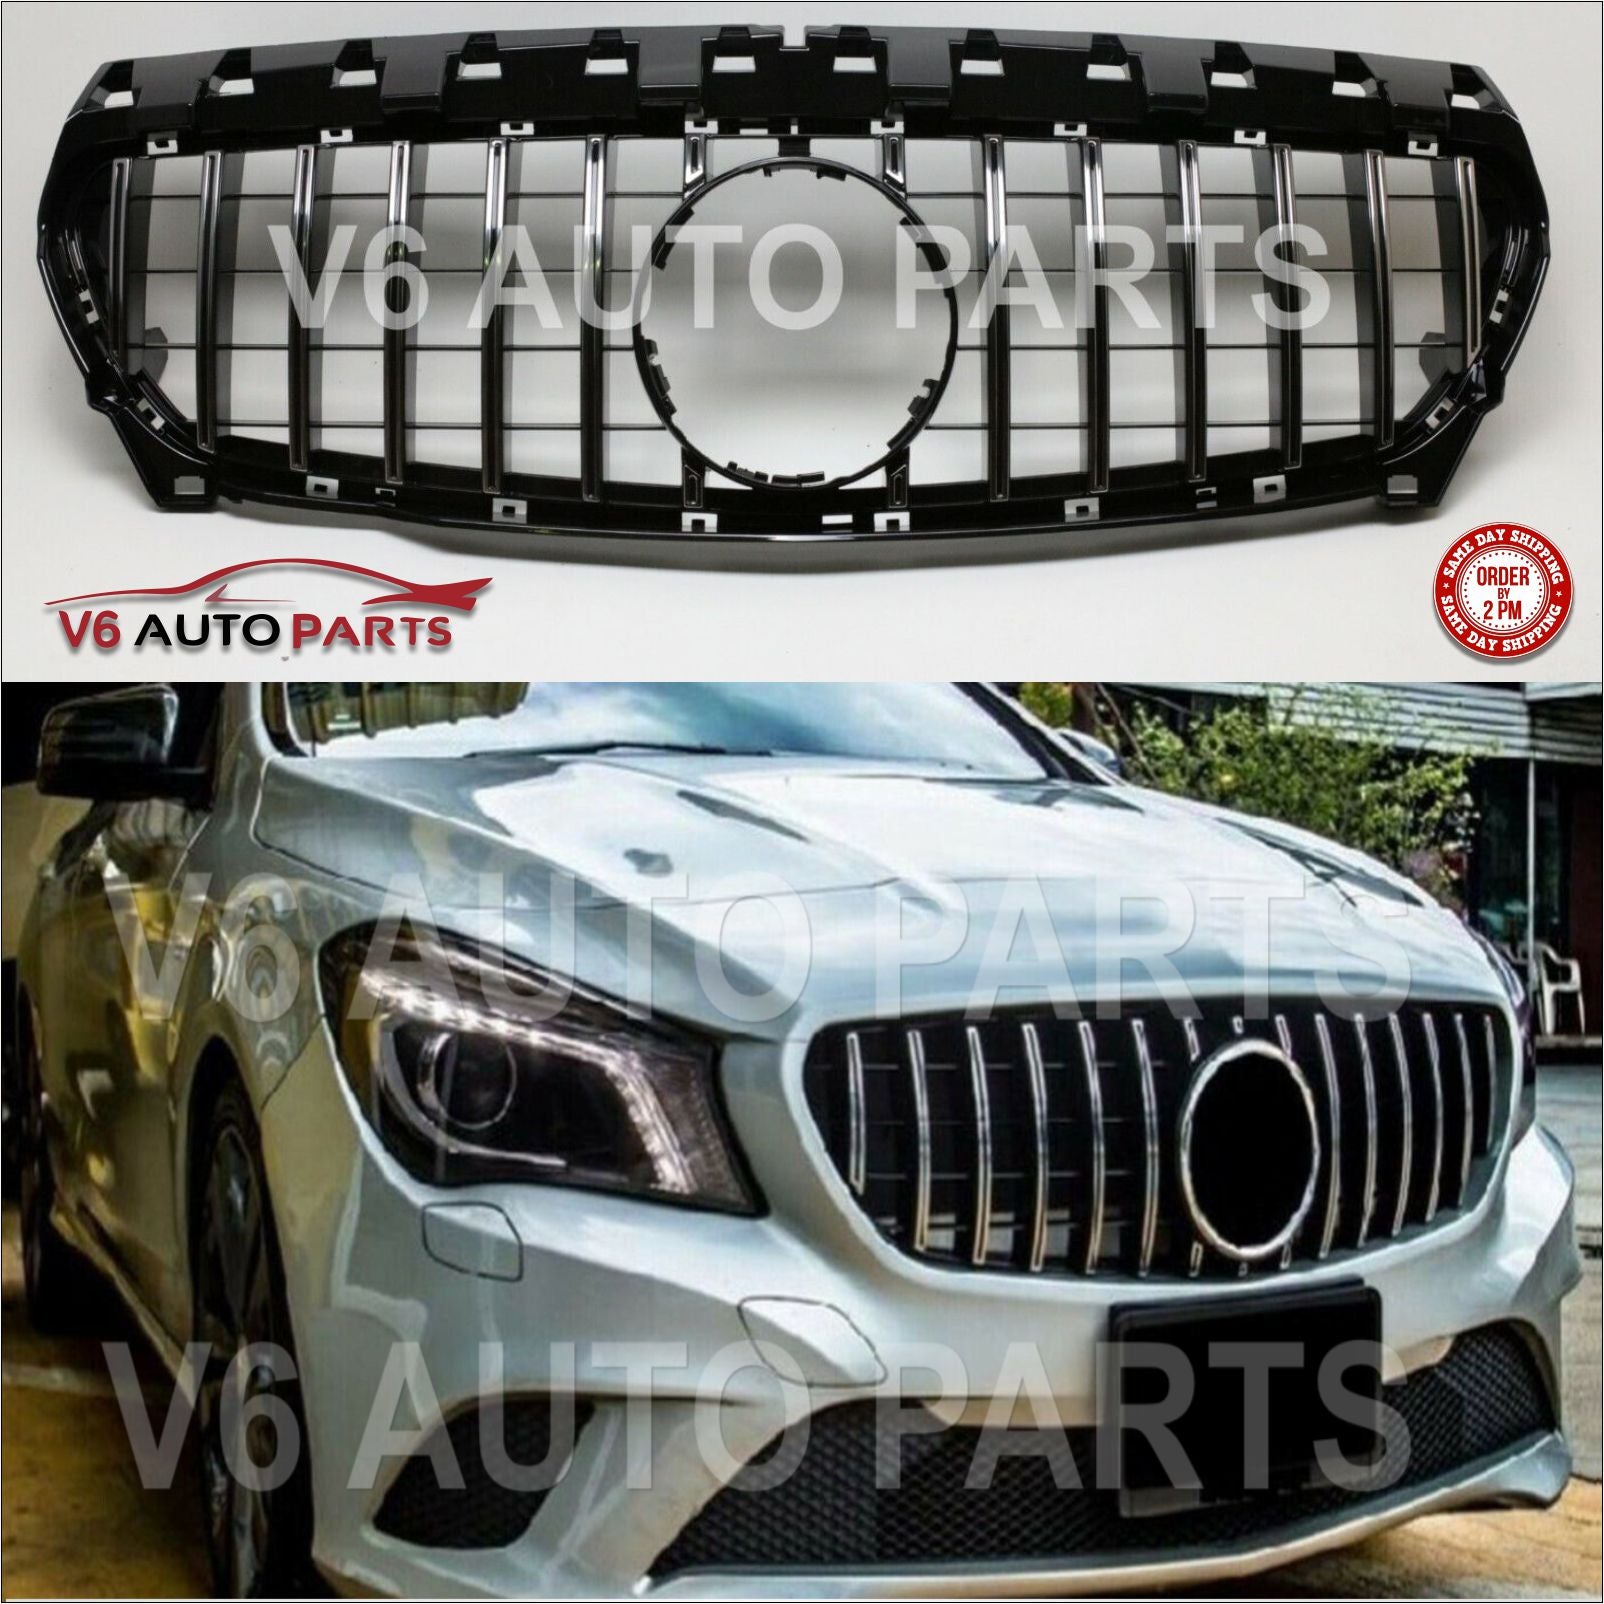 For Mercedes CLA-Class W117 Grill 200 180d Front Radiator Grille 2013-17 GT AMG